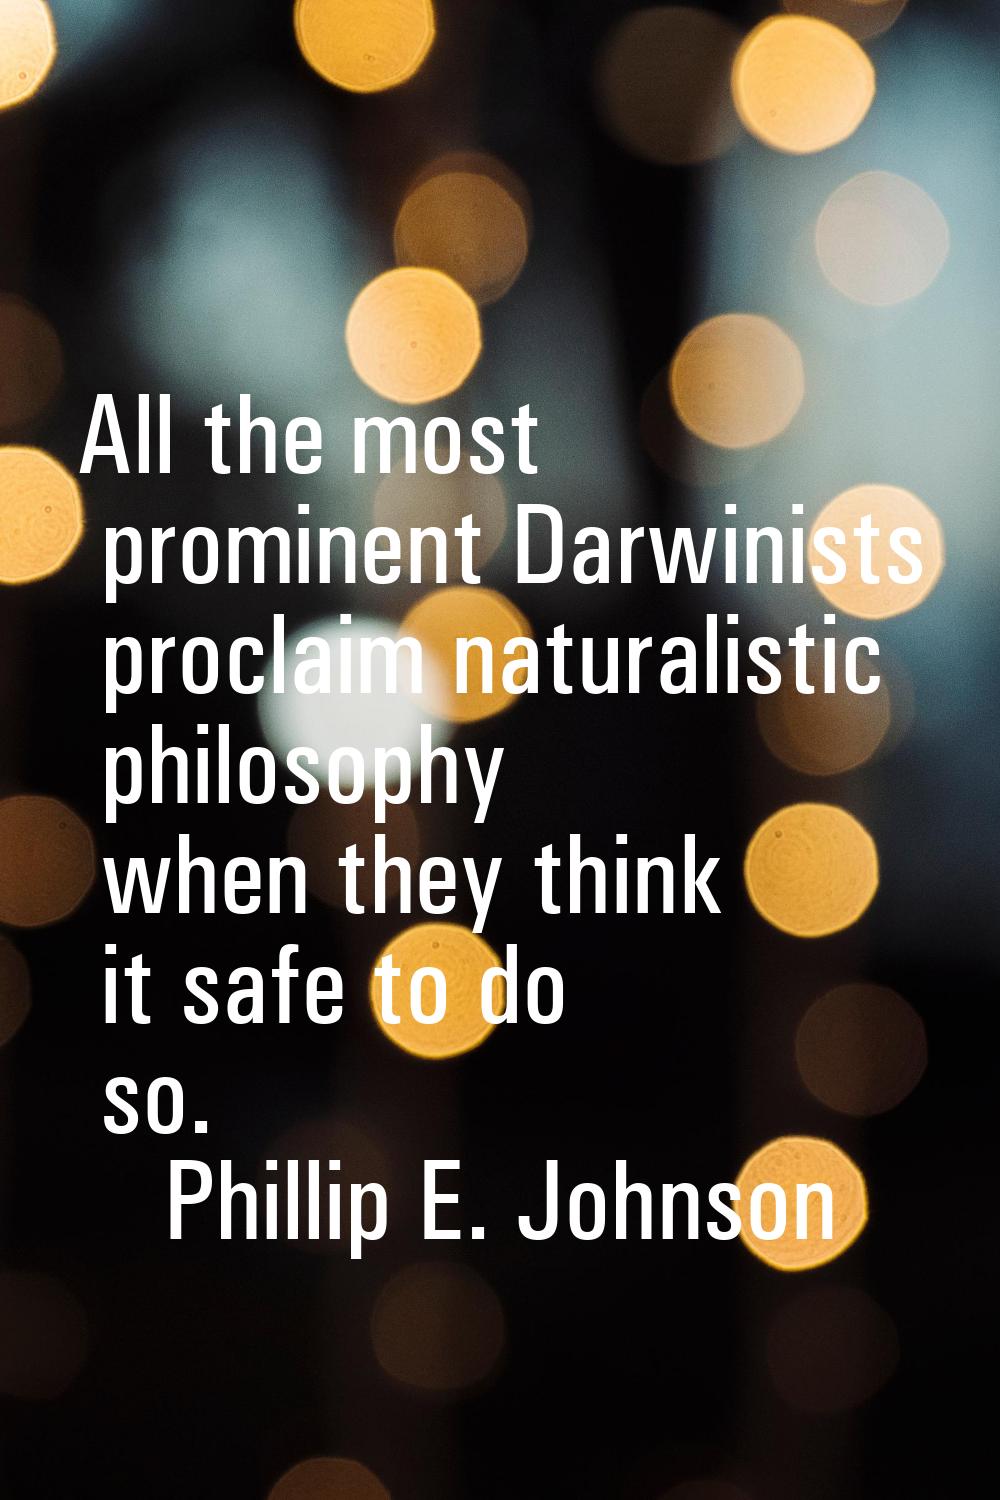 All the most prominent Darwinists proclaim naturalistic philosophy when they think it safe to do so